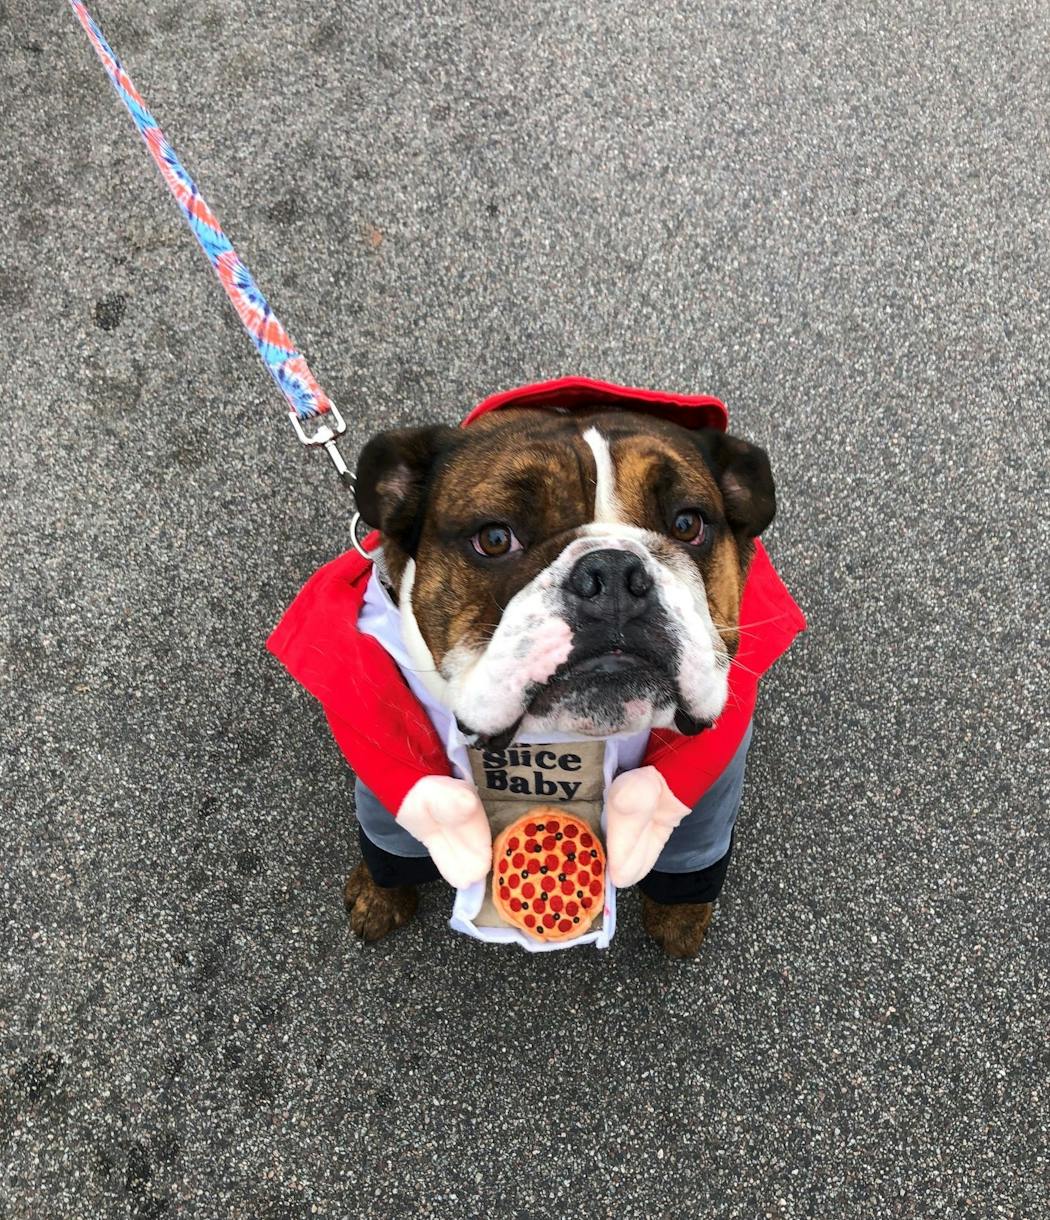 Reuben, an English bulldog, sported a pizza delivery man costume for Saturday’s dog costume contest in Hopkins.